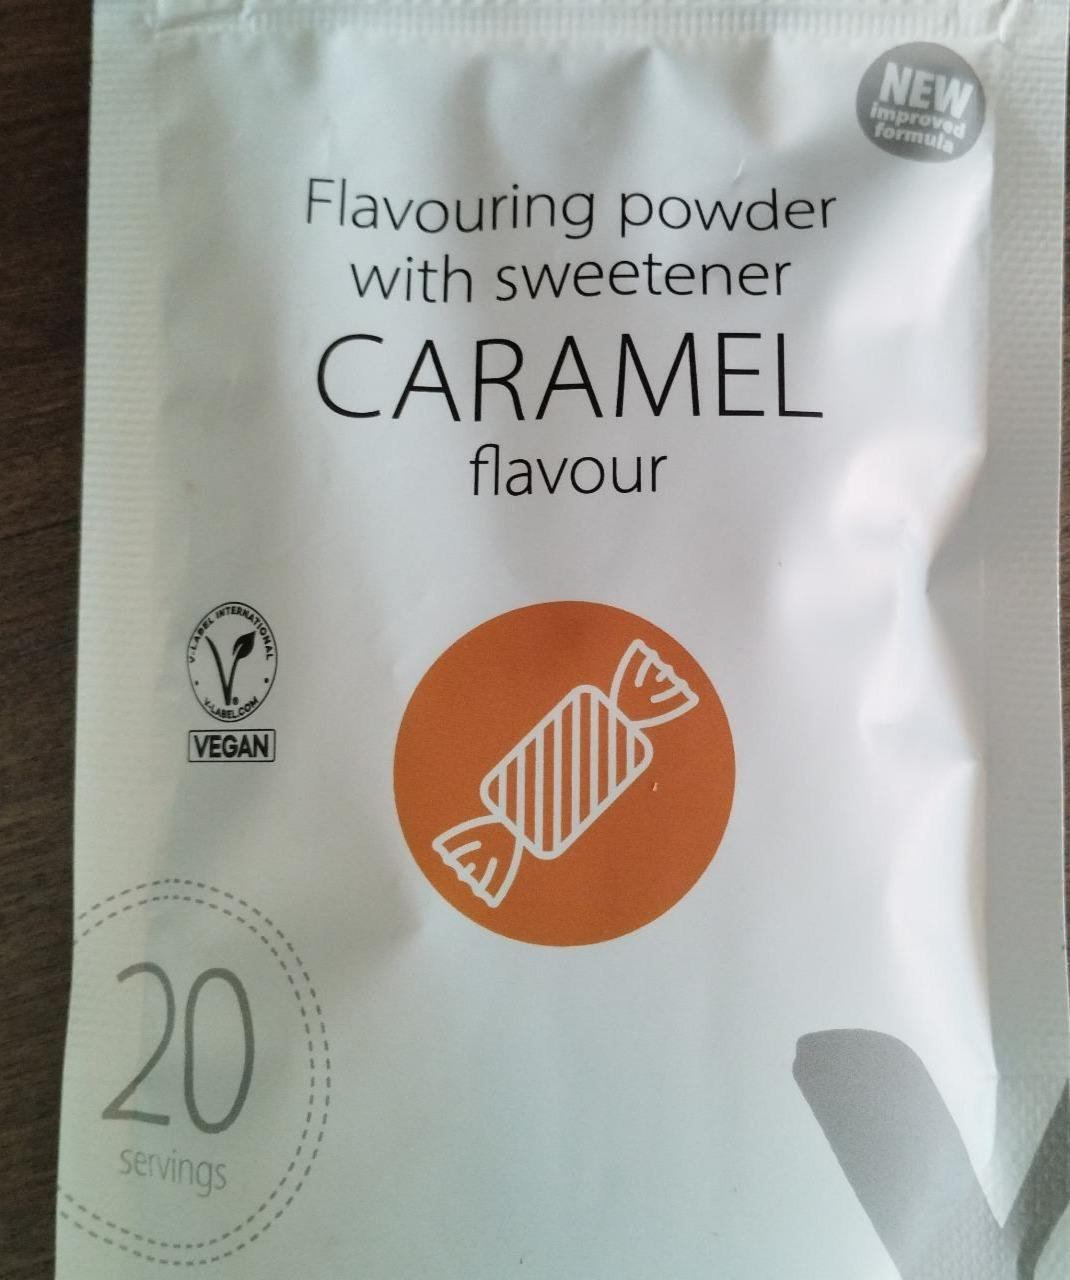 Fotografie - Flavouring powder with sweetener Caramel flavour KetoMix